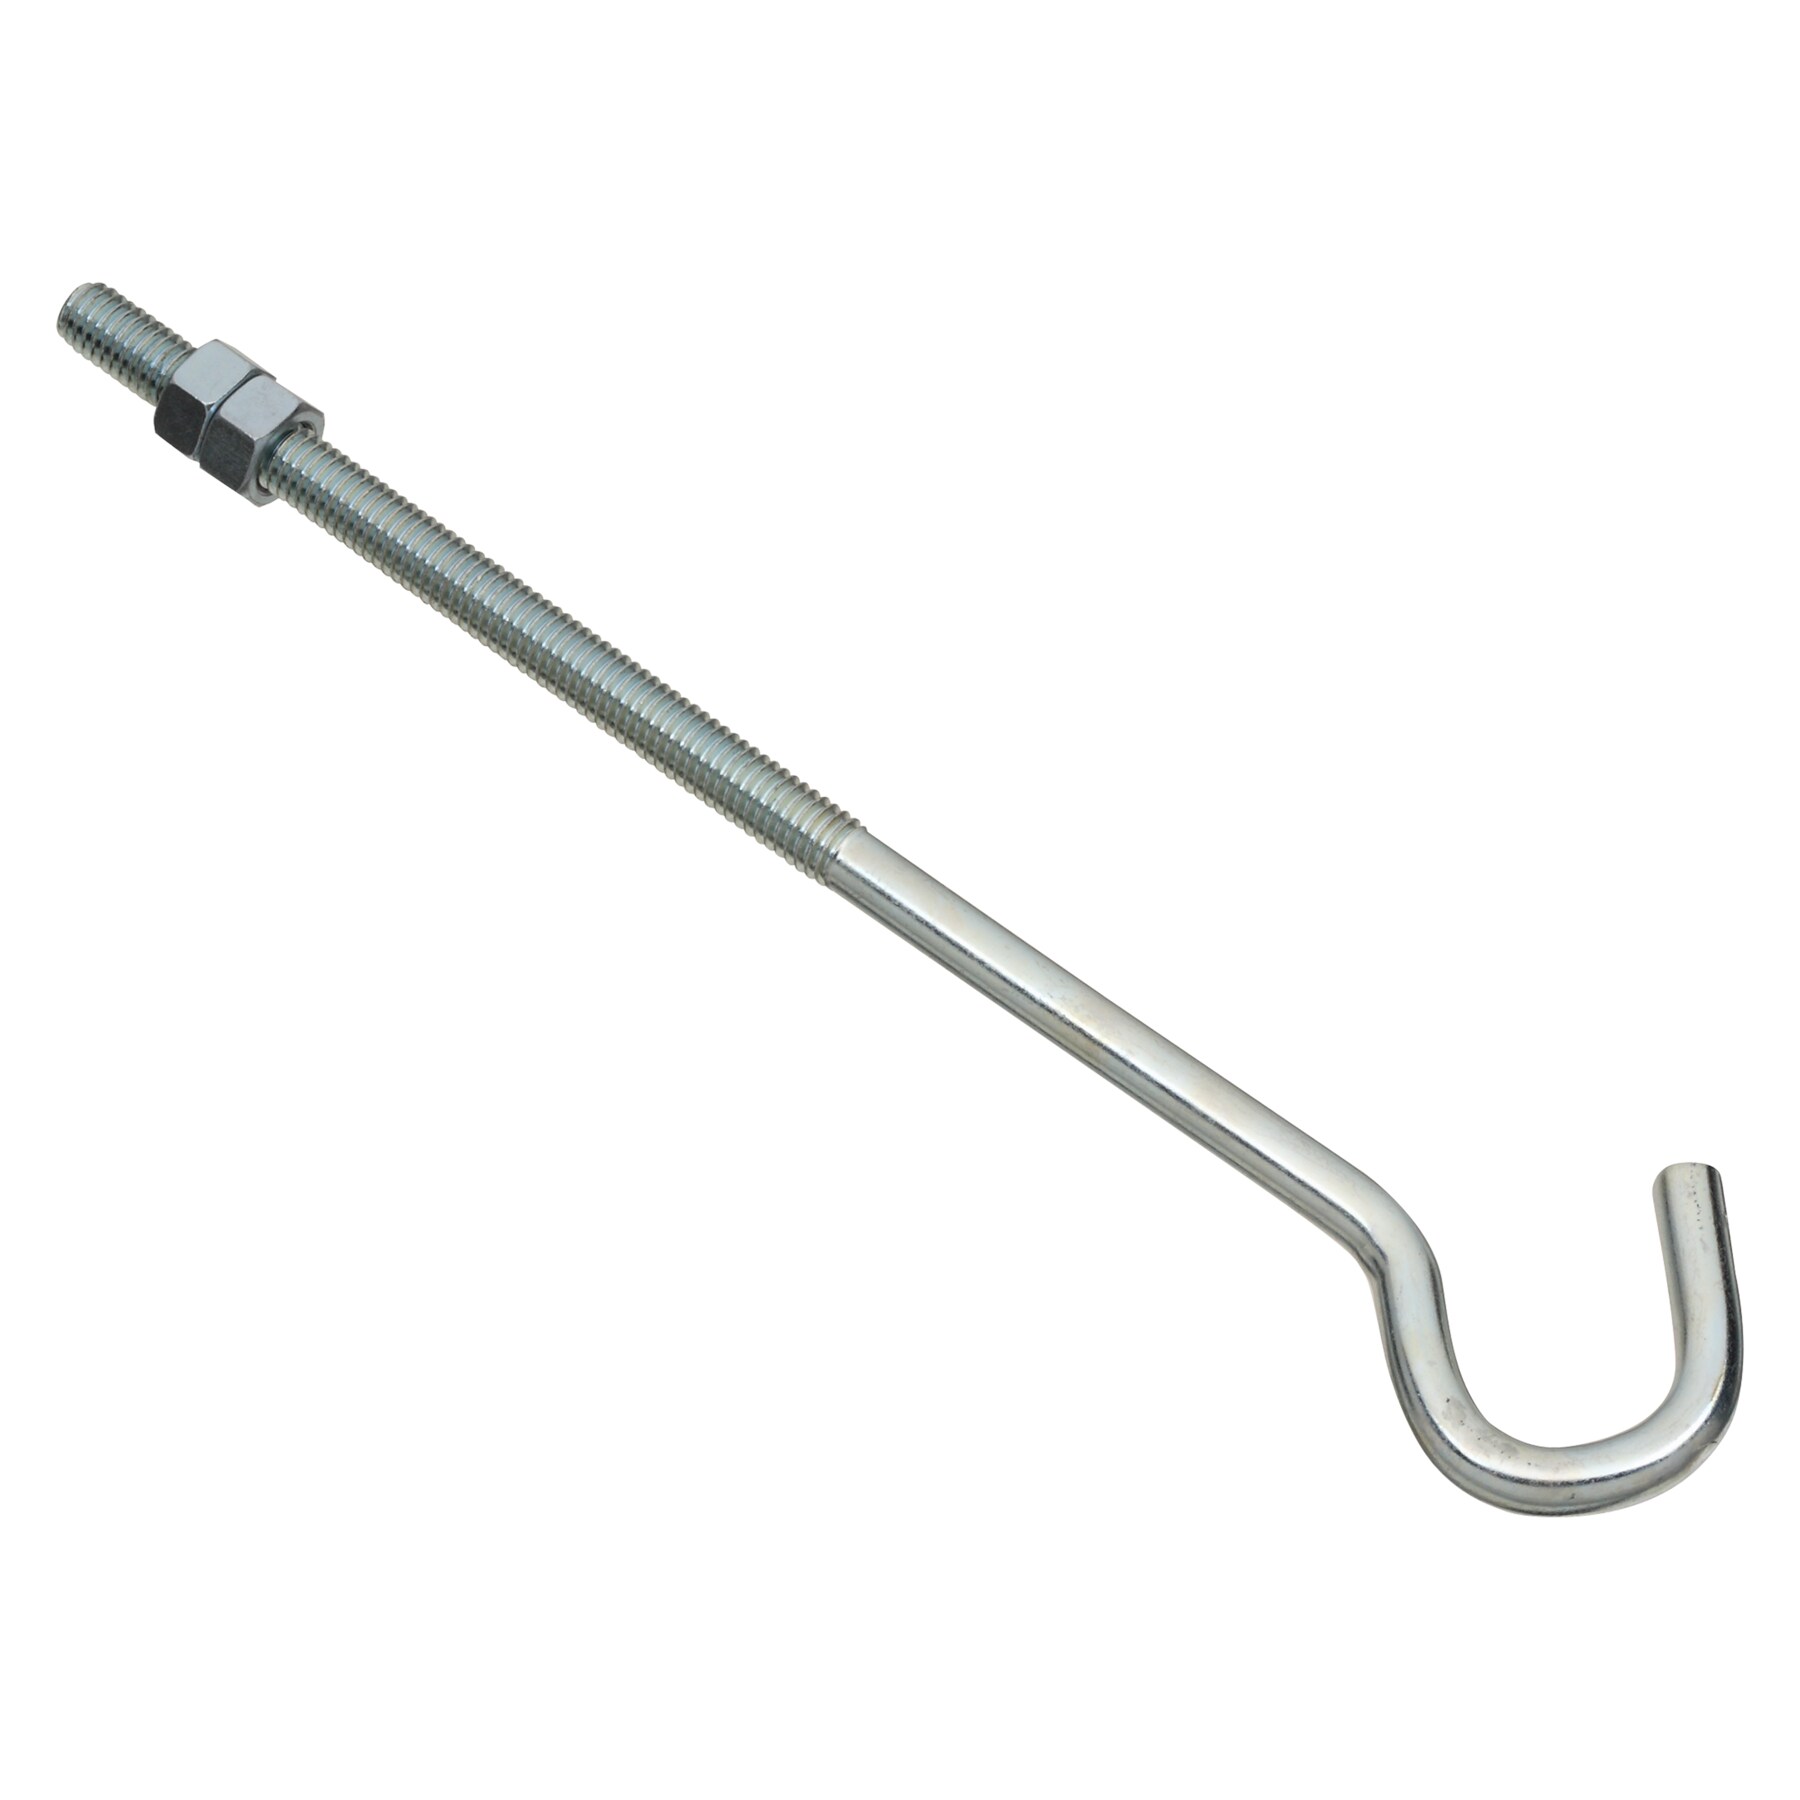 National Hardware 0.33-in Zinc Plated Steel Screw Hook in the